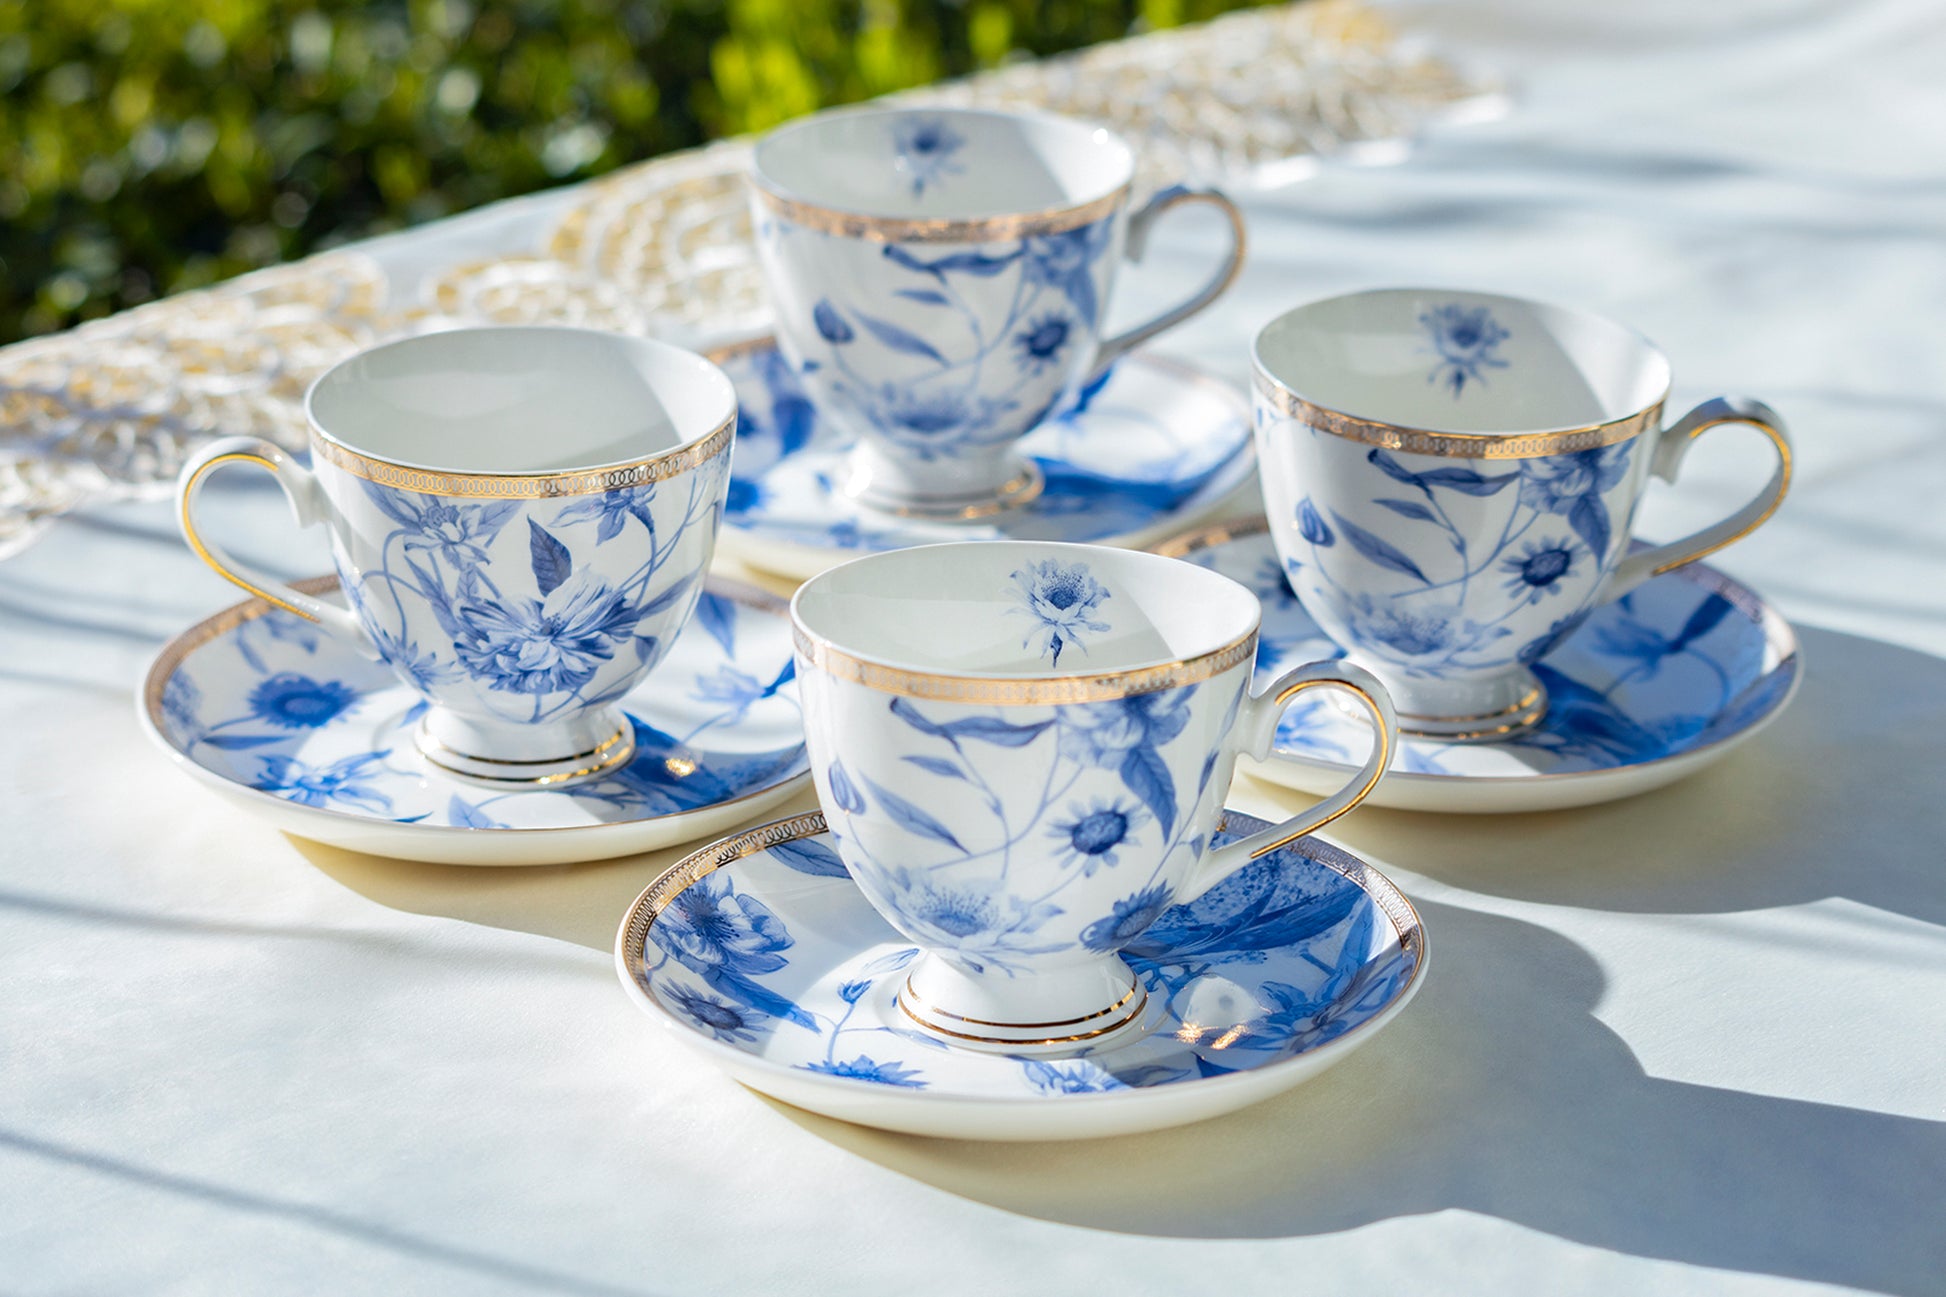 Ceramic Cups and Saucers